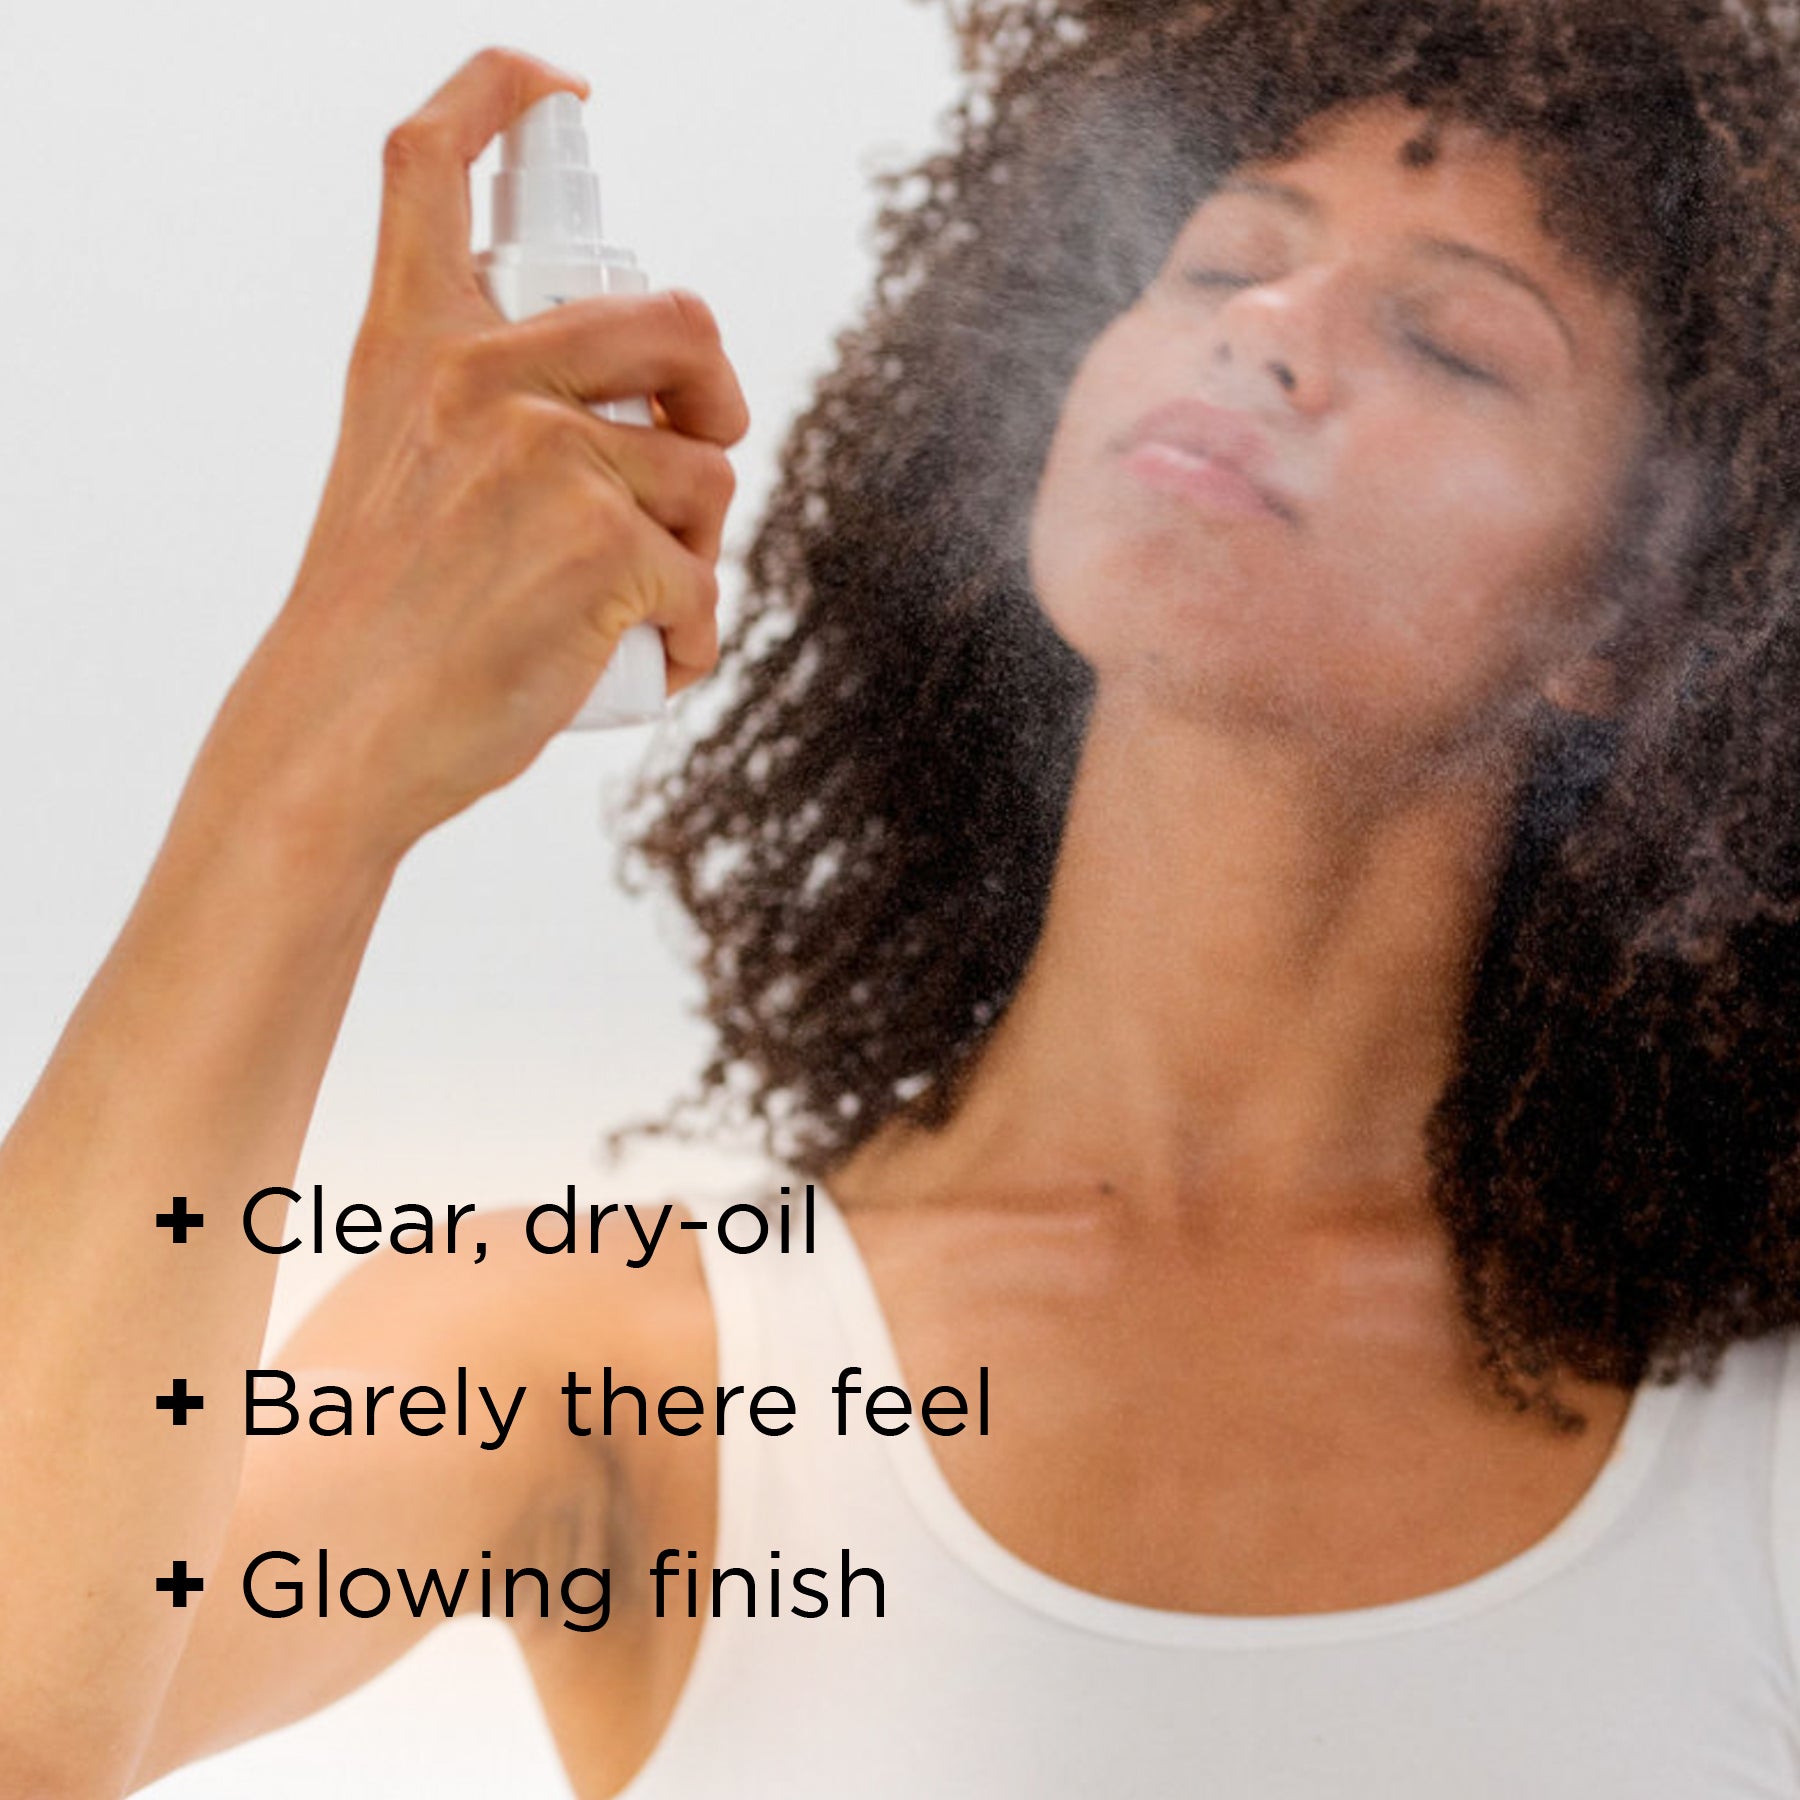 model applying mist with benefits listed